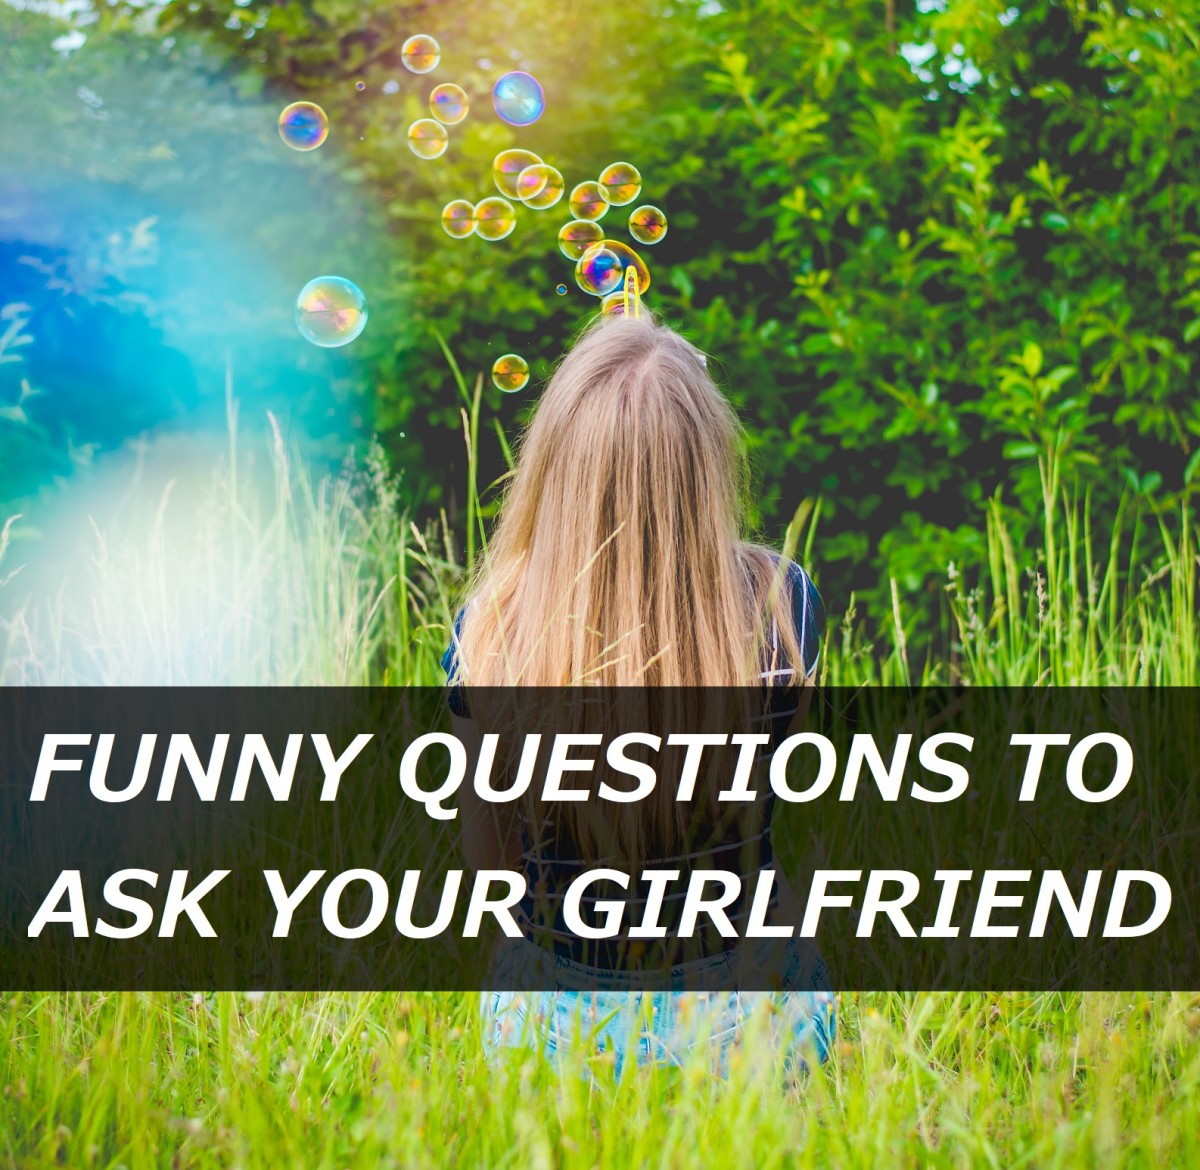 100+ Funny Questions to Ask Your Girlfriend - PairedLife